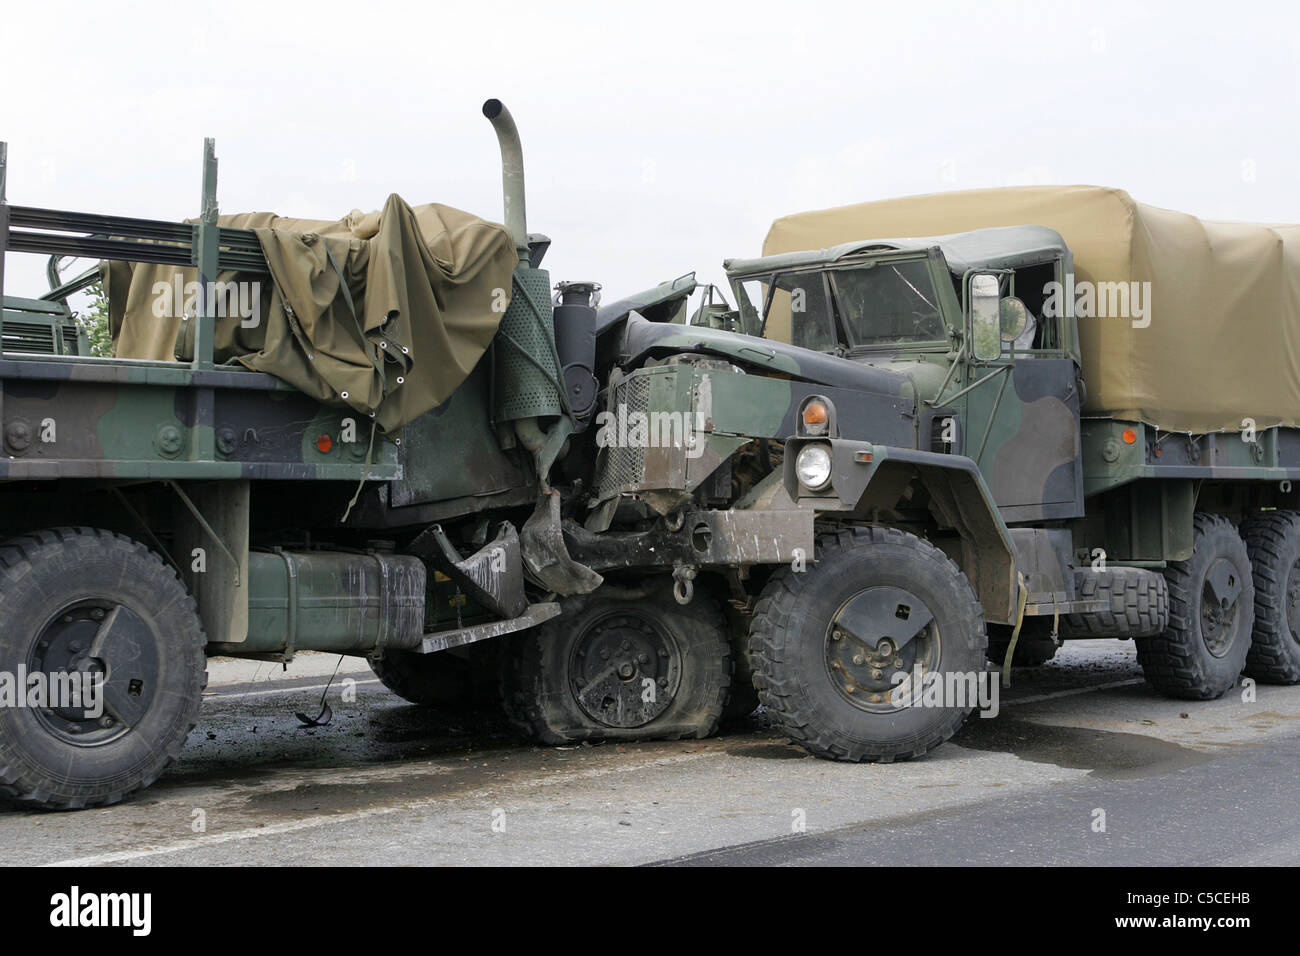 Army trucks in head on collision. Stock Photo